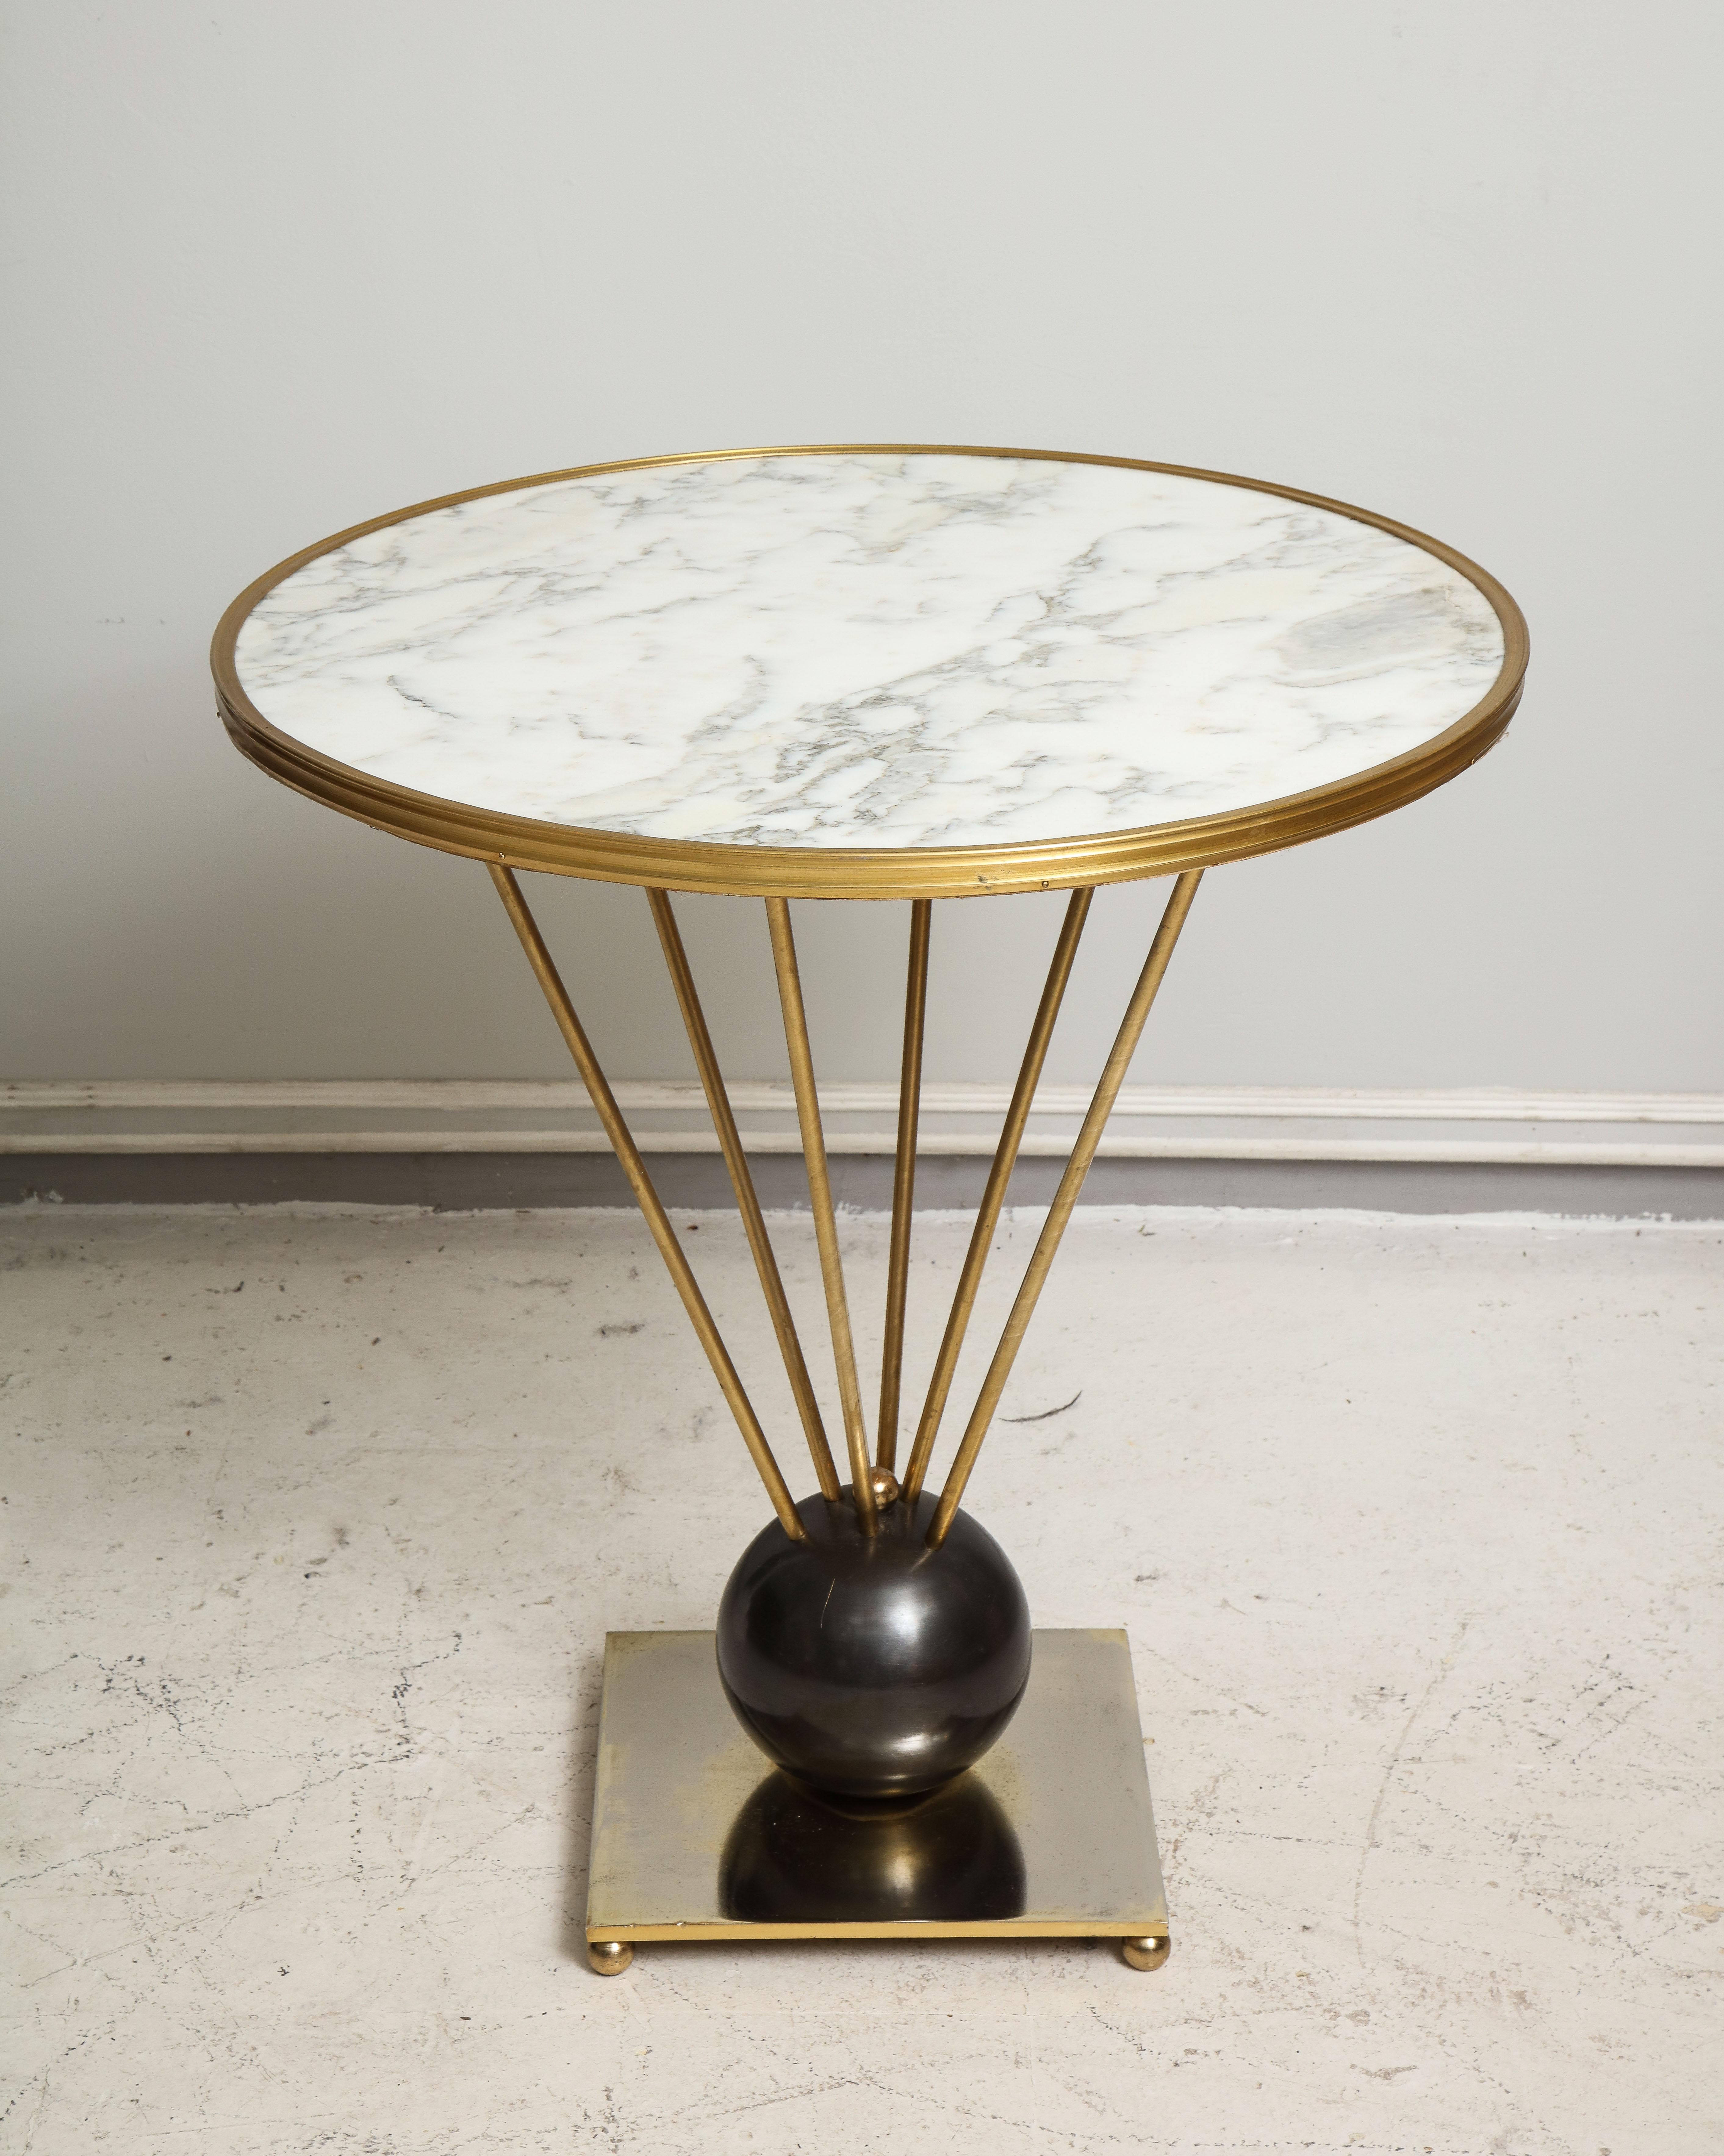 Sculptural pair of bronze and iron Italian Mid-Century Modern circular tables with marble top.